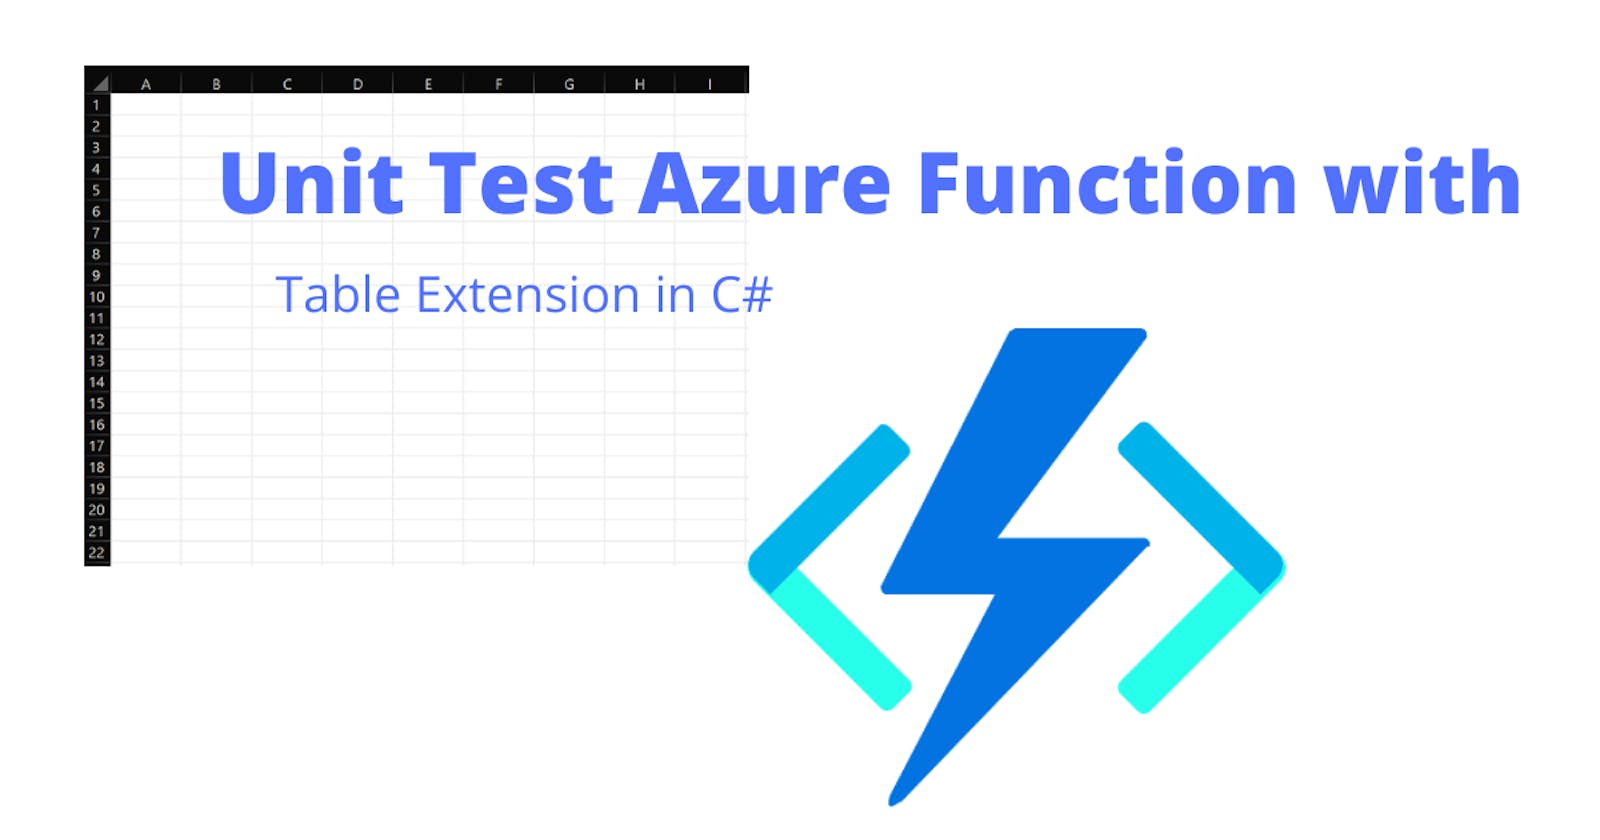 Unit Test Azure Function with Table Extension in C#